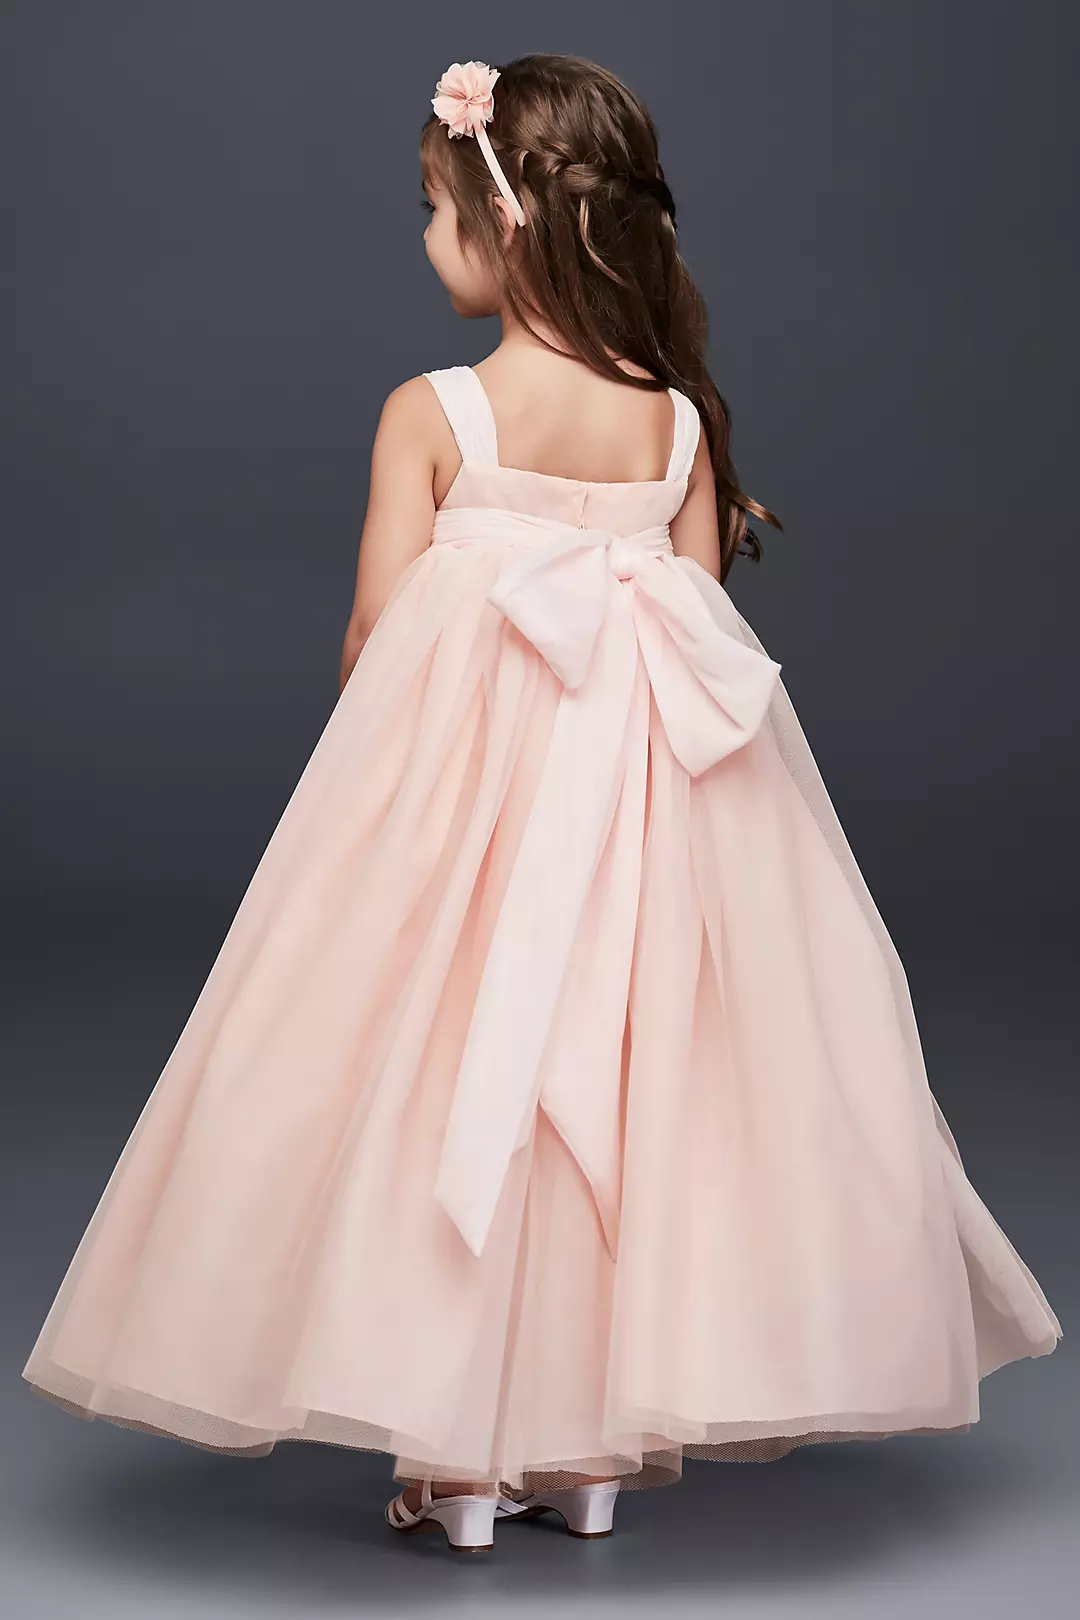 Tulle Flower Girl Dress with 3D Floral Bodice Image 2